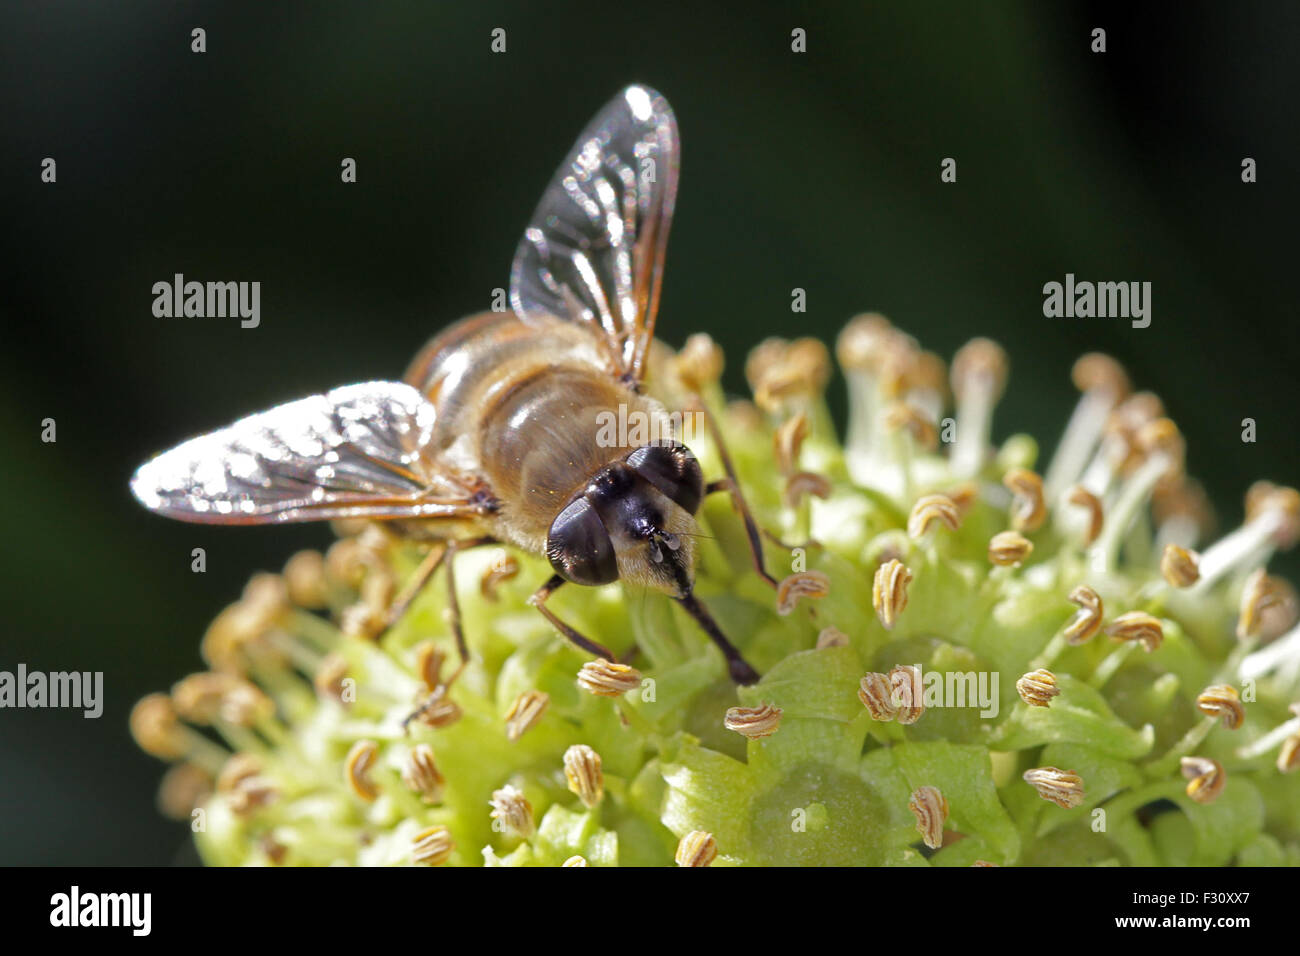 Close-up, macro photo of a Fly feeding on an Ivy flower. Stock Photo